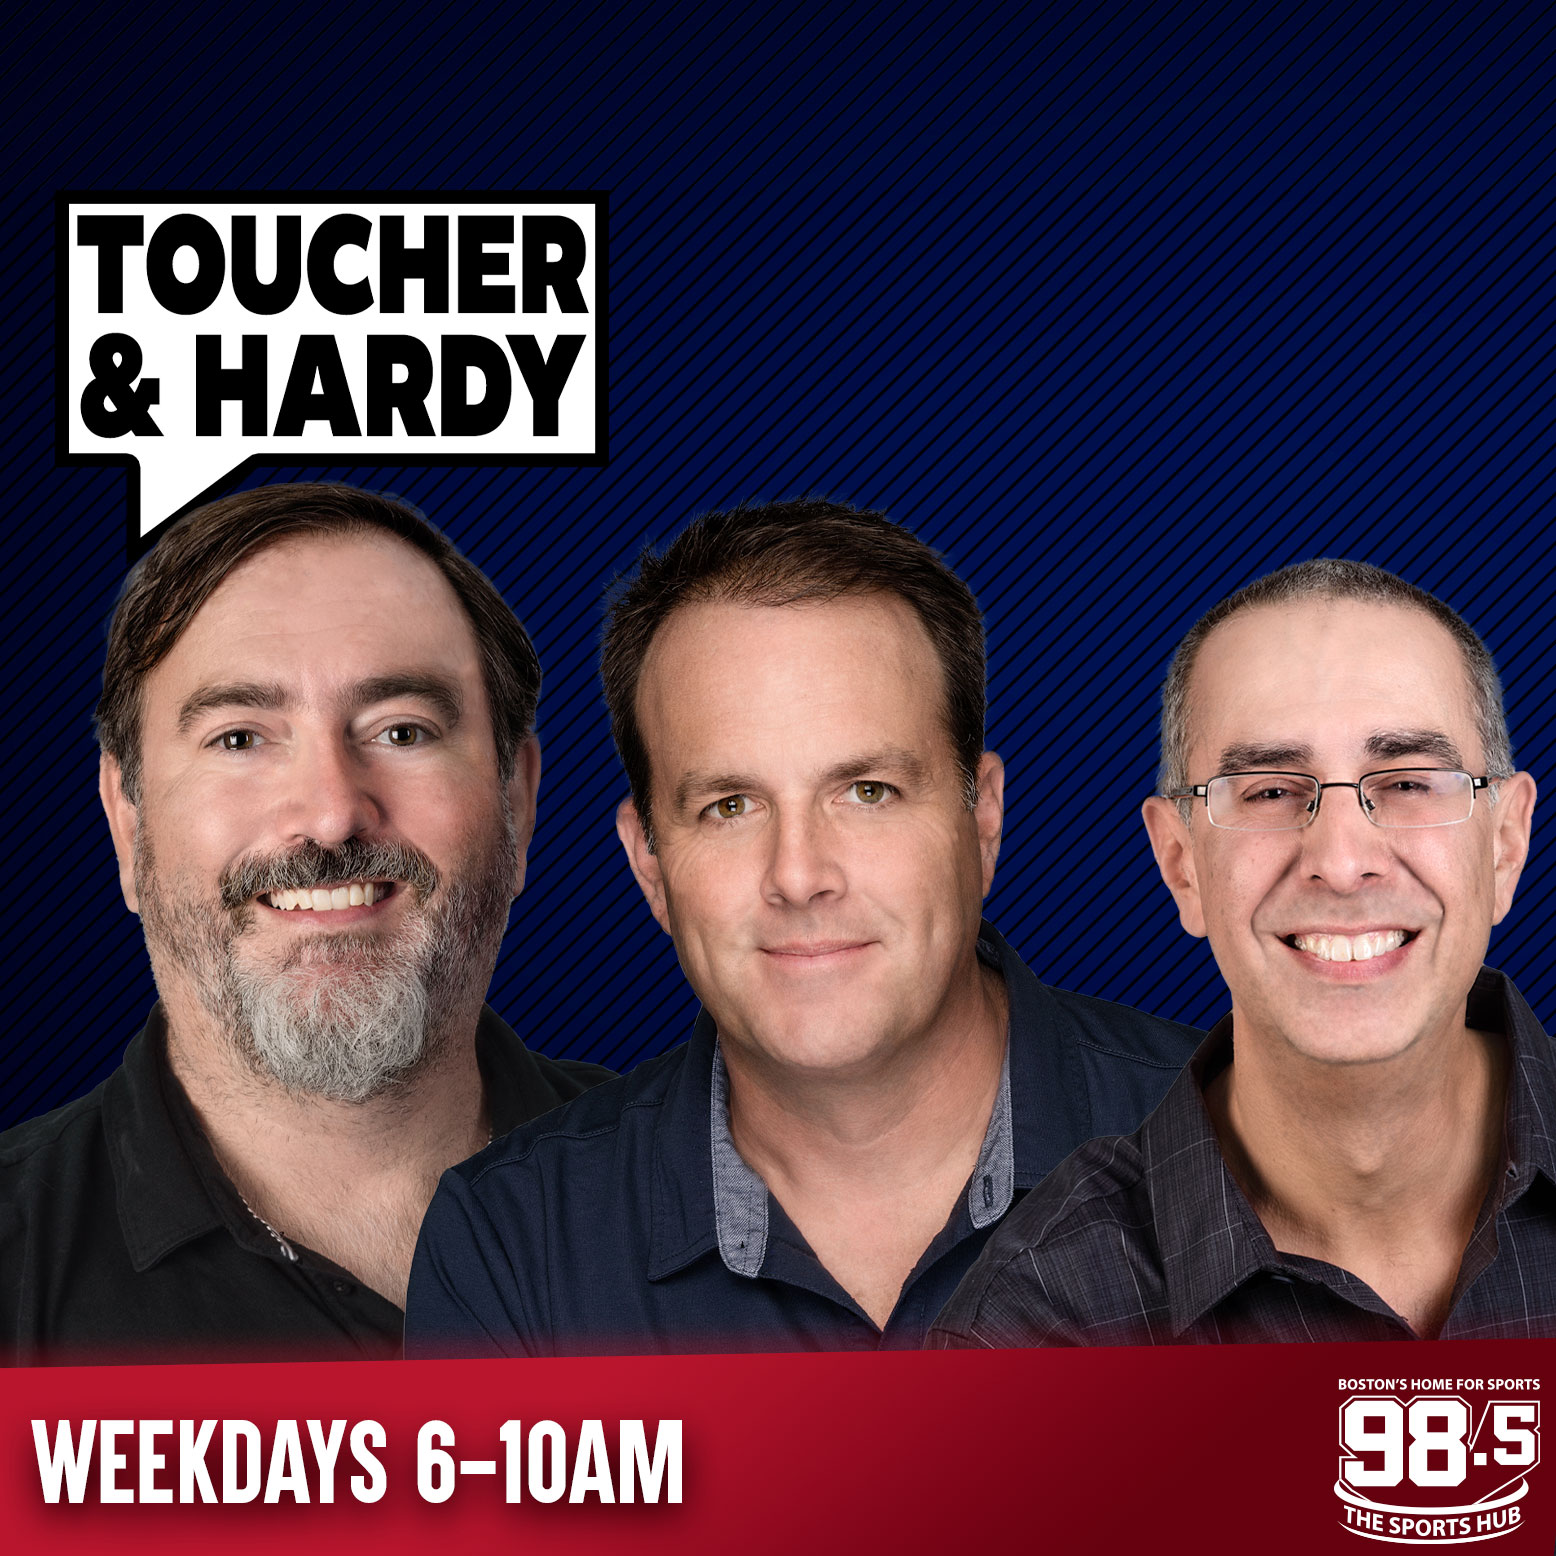 “A Double Rugged Bear” | Mike Gorman joins Toucher & Hardy - 5/29 (Hour 3)